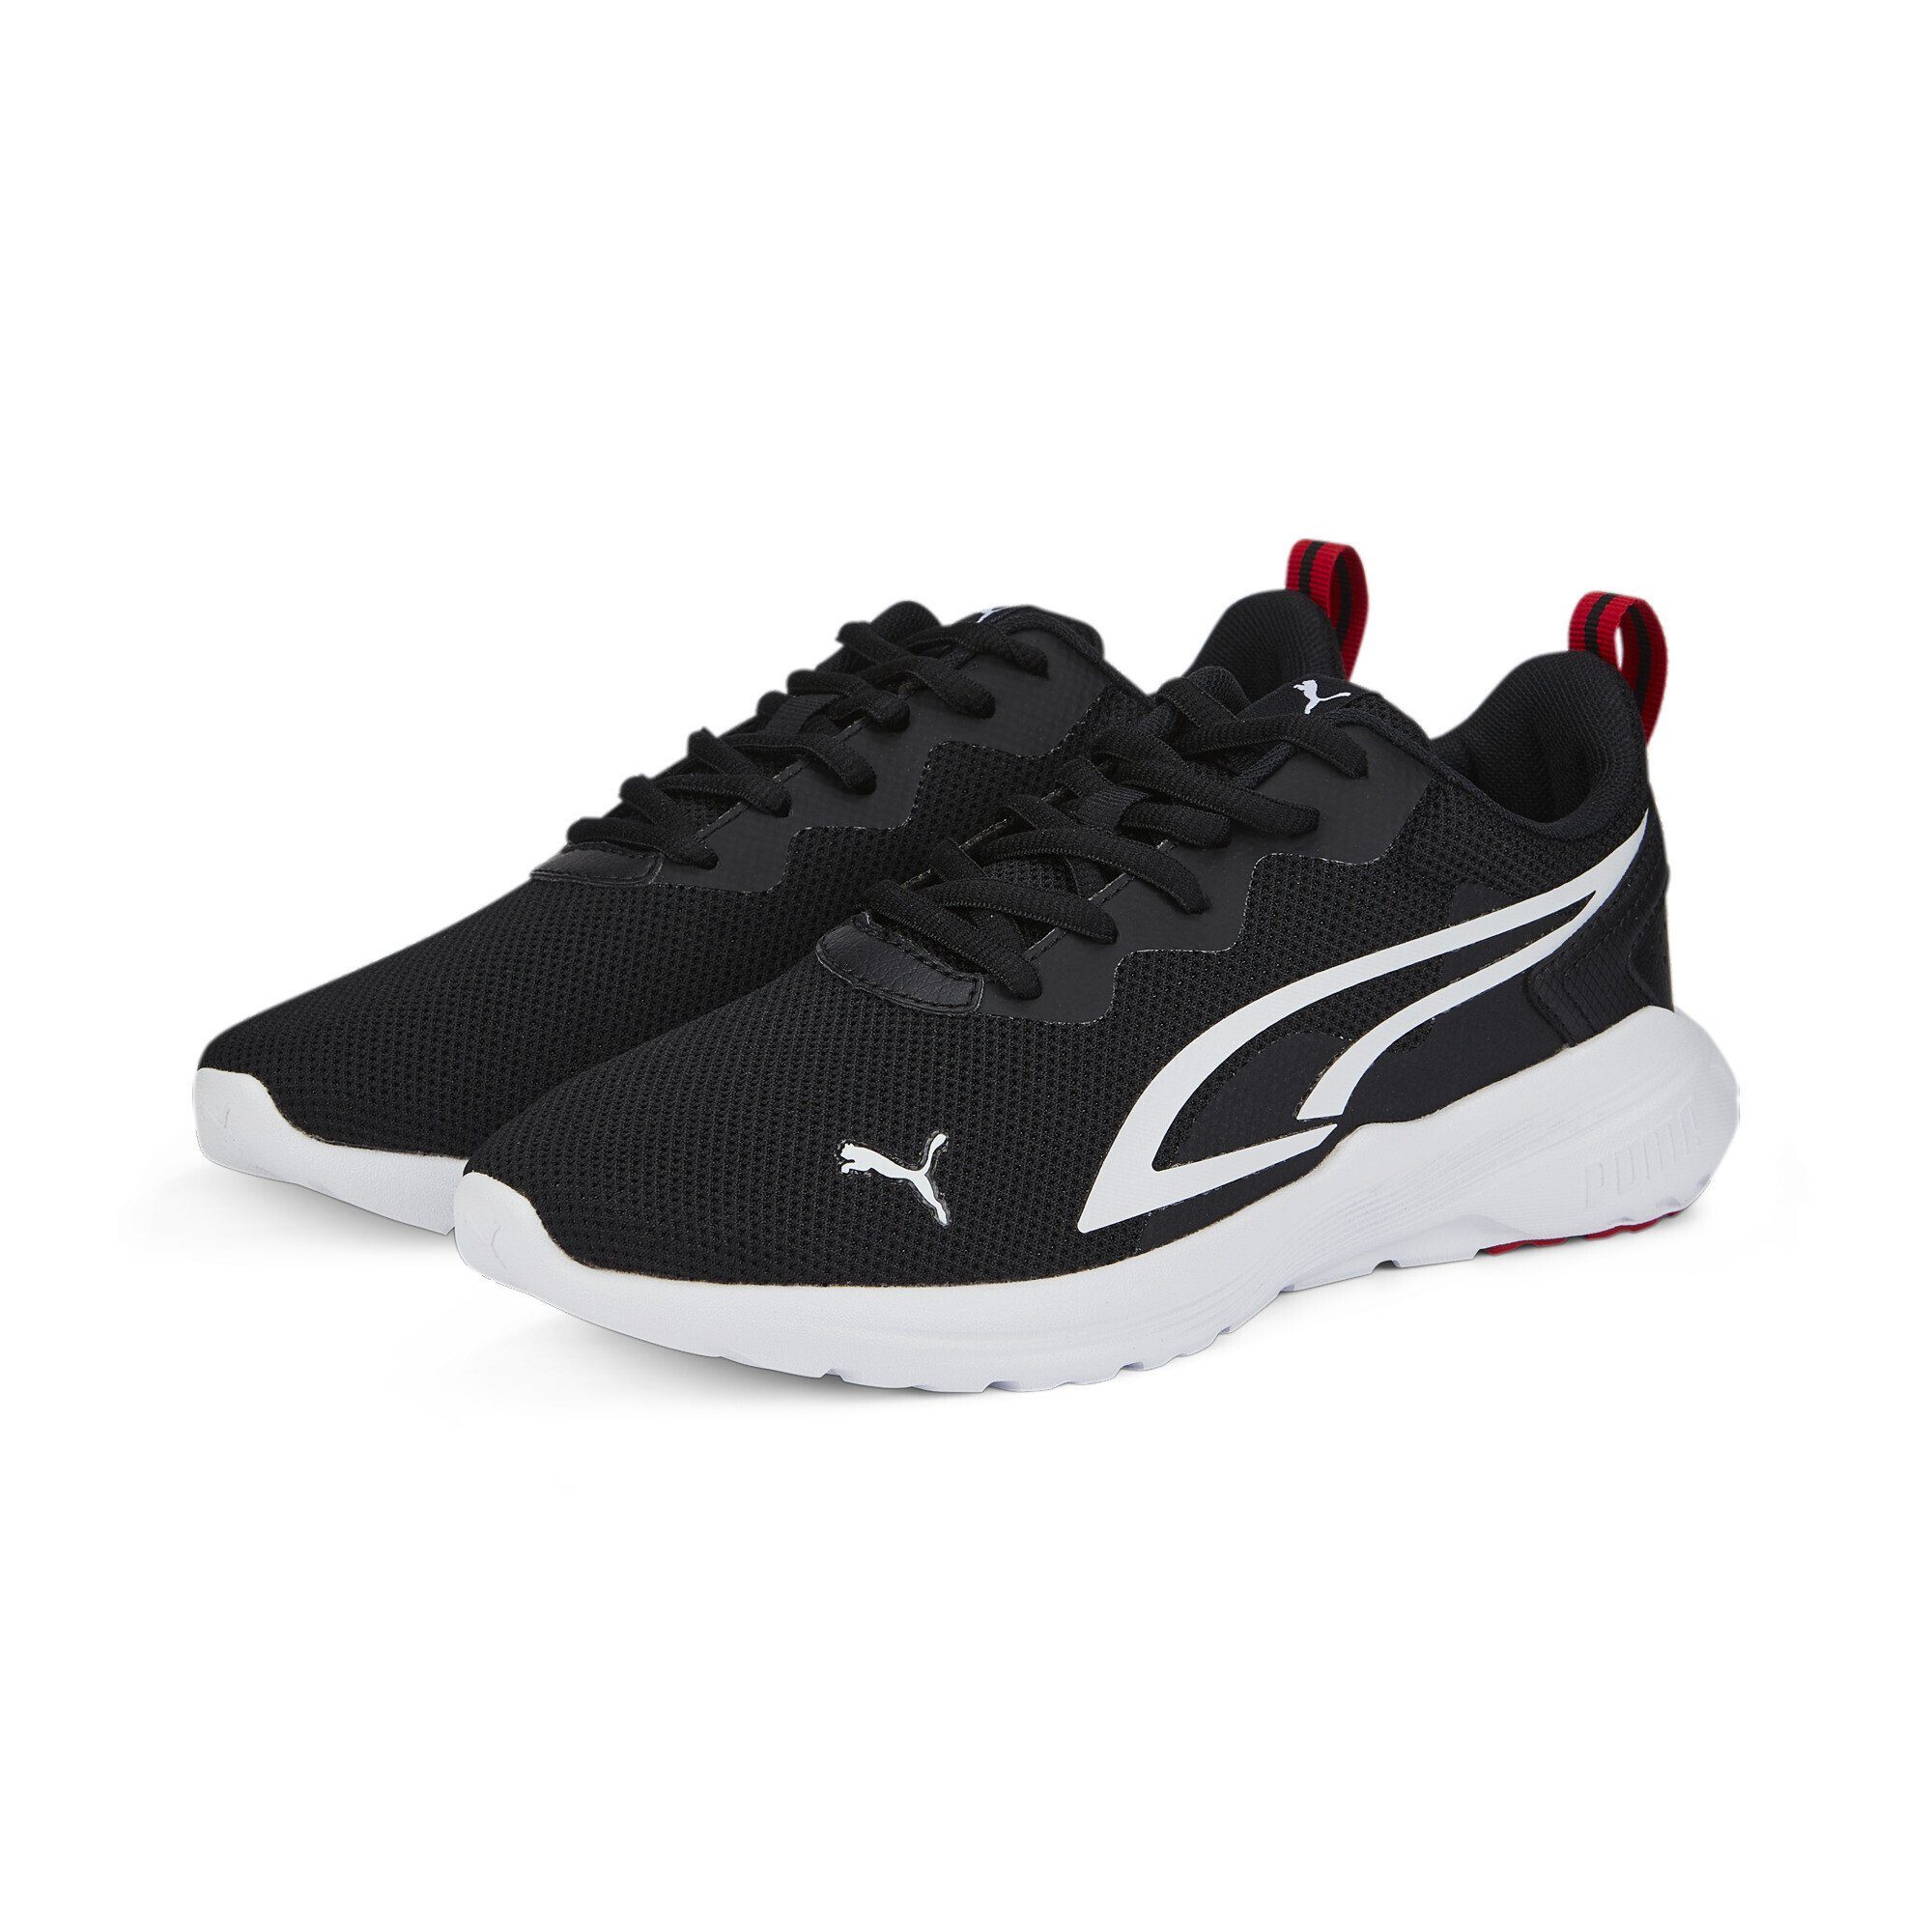 PUMA All Day Active Sneakers Jugendliche Sneaker Black White